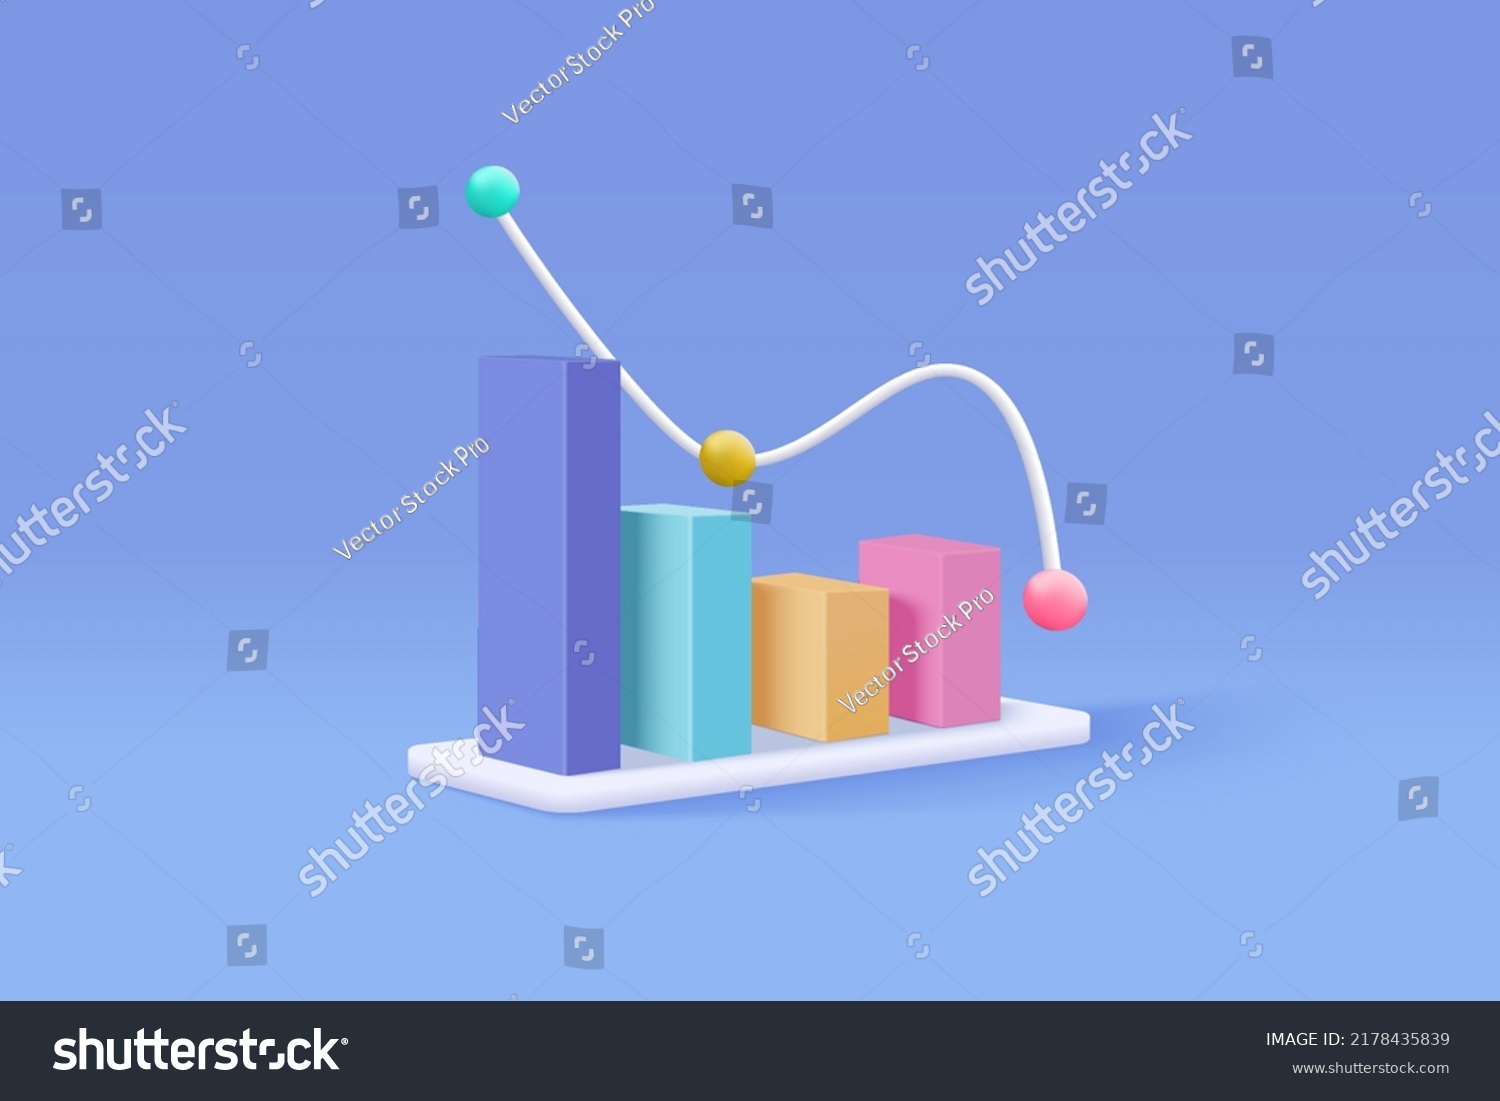 SVG of 3D graph stock icon with plummeting. Business failure with negative trend concept, growth statistic. 3d representation for finance investment. 3d trading stock icon vector render illustration svg